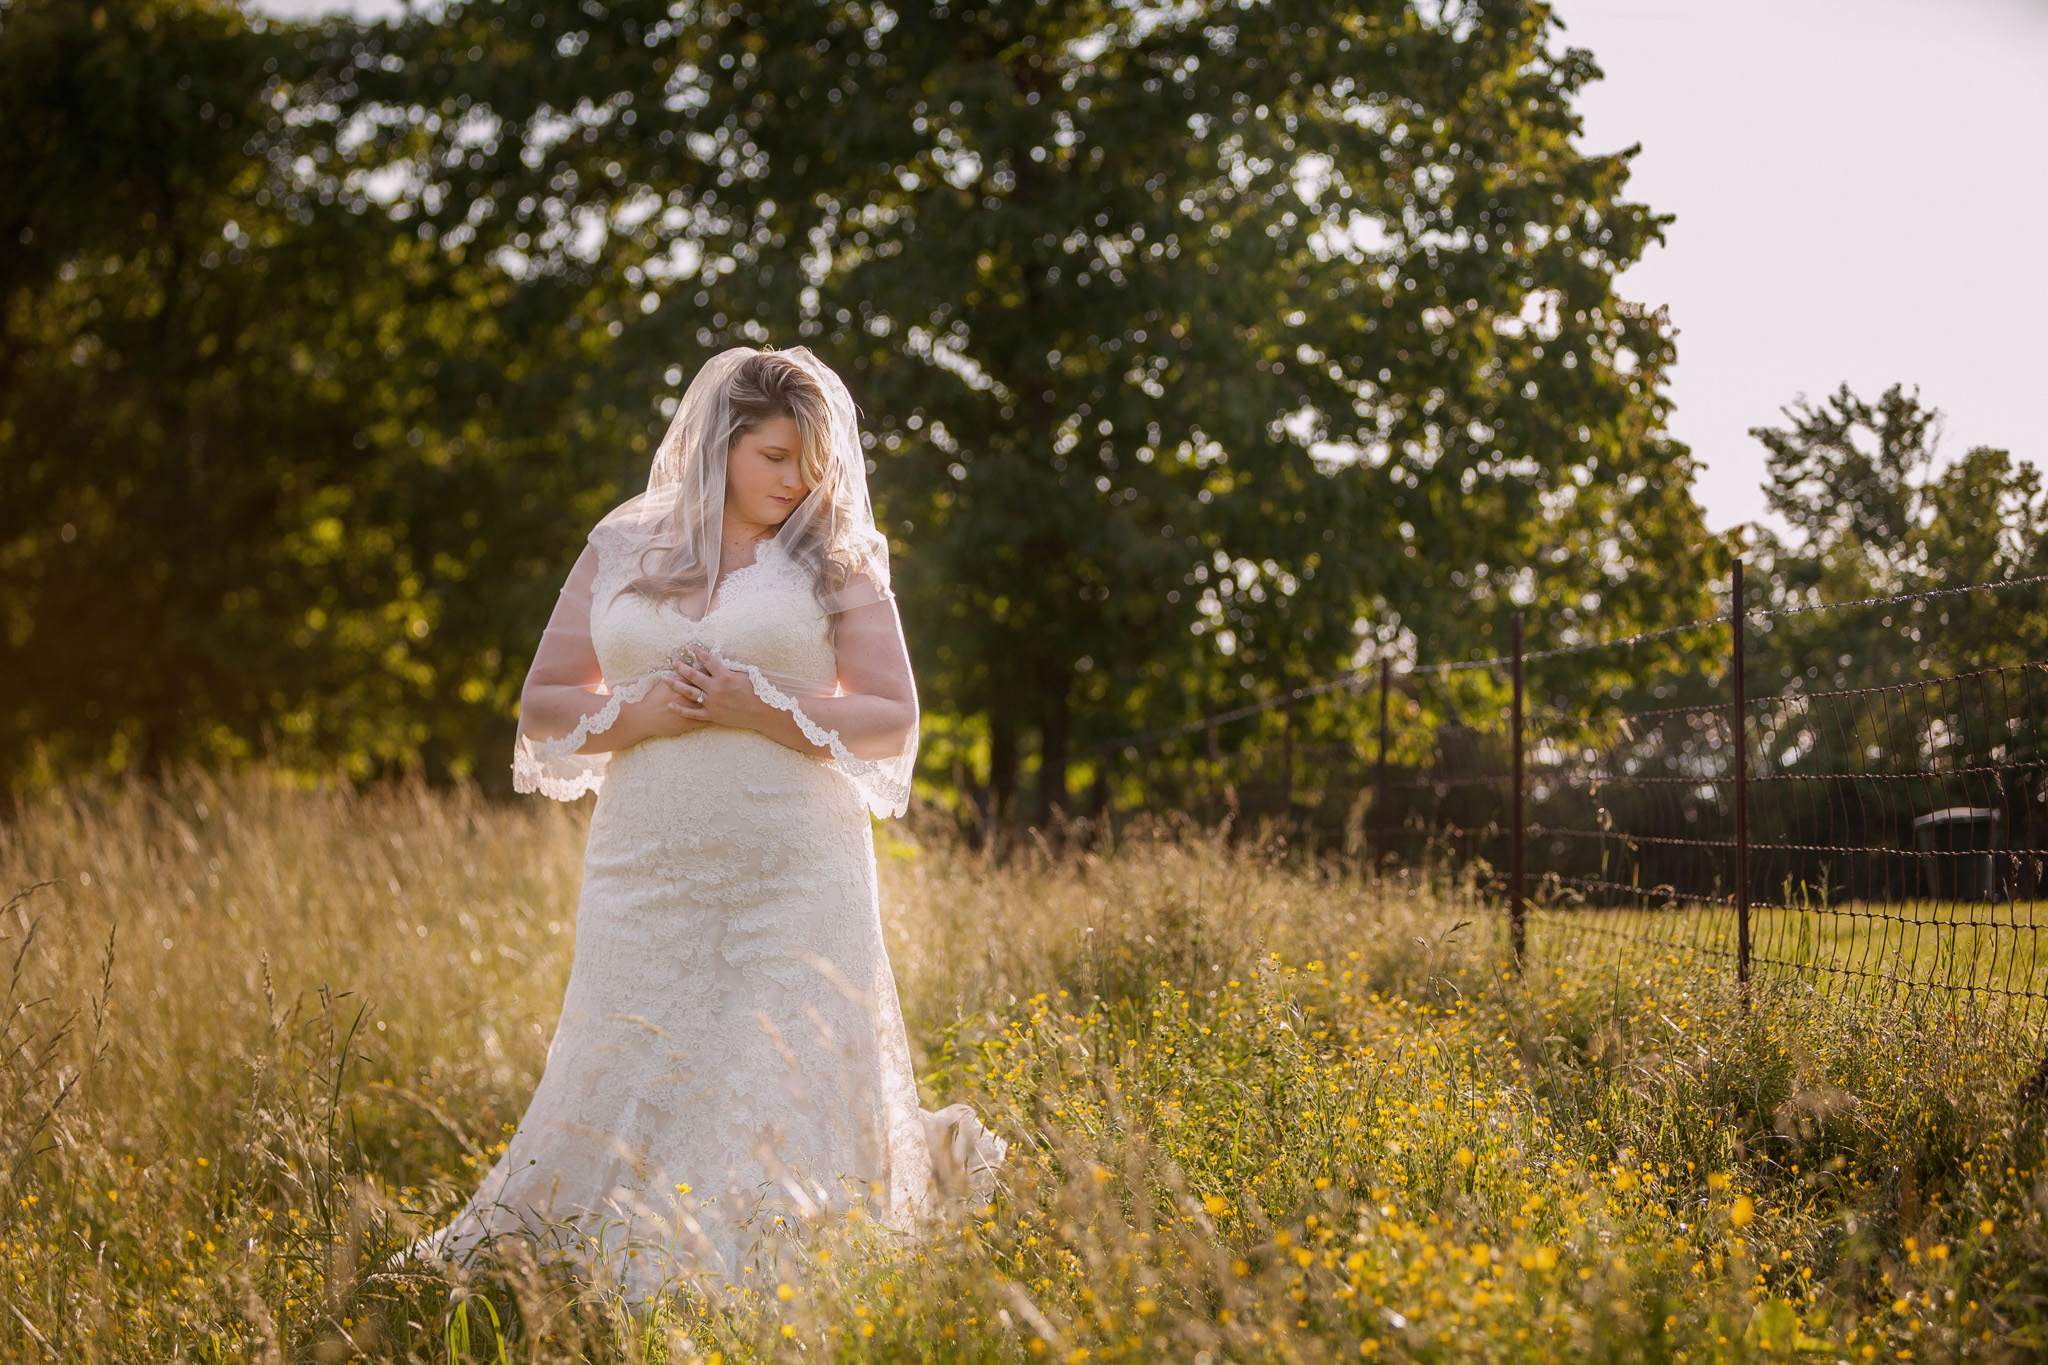 A romantic and whimsical bridal portrait in Asheboro North Carolina photo by Mabyn Ludke